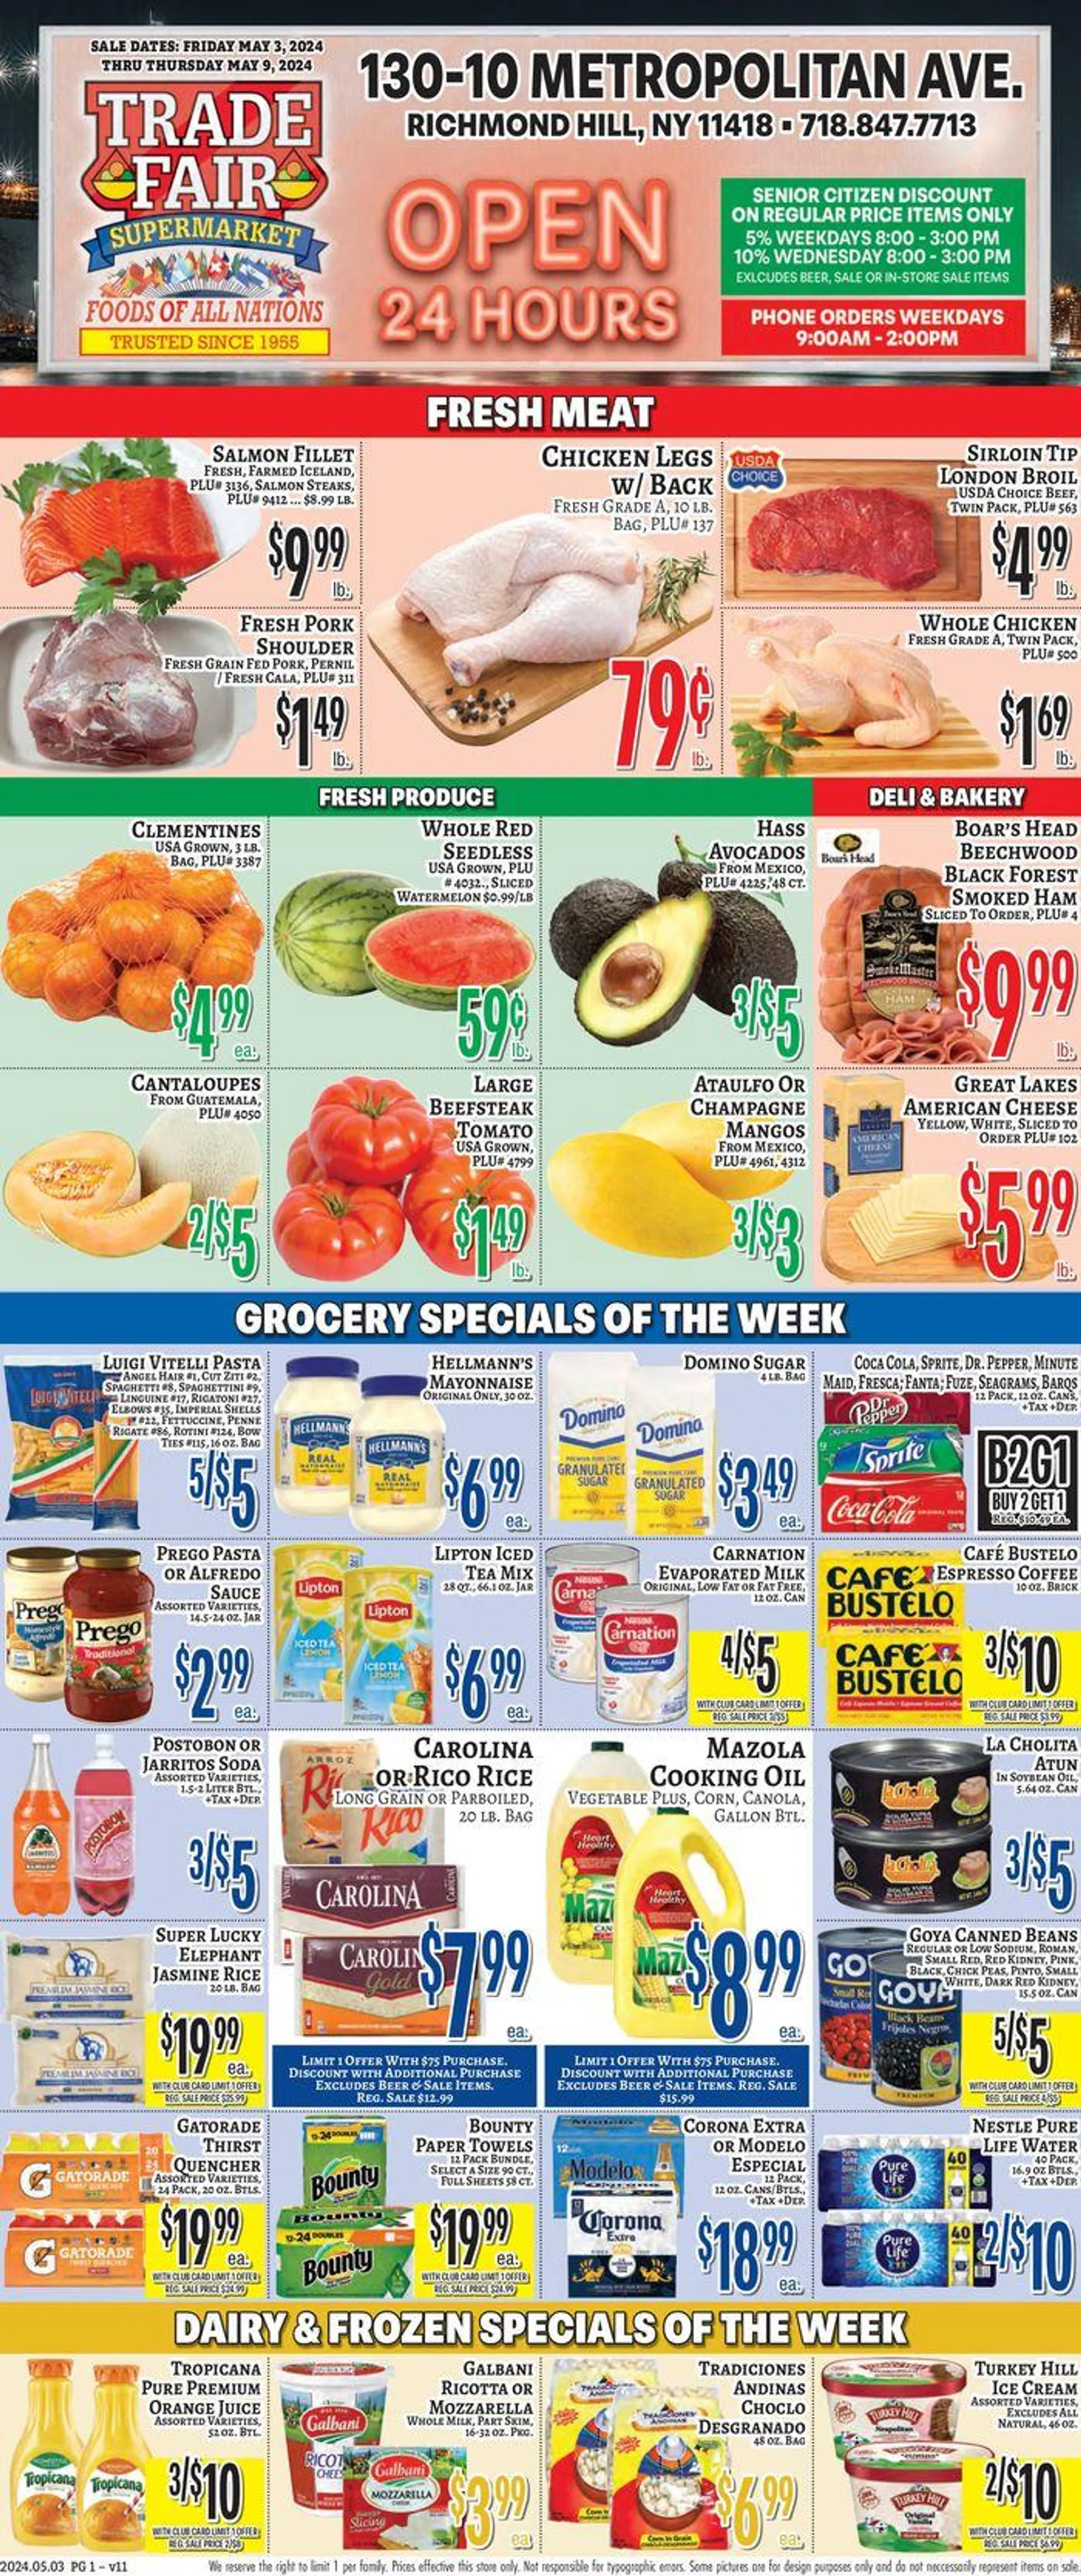 New weekly ad - 1